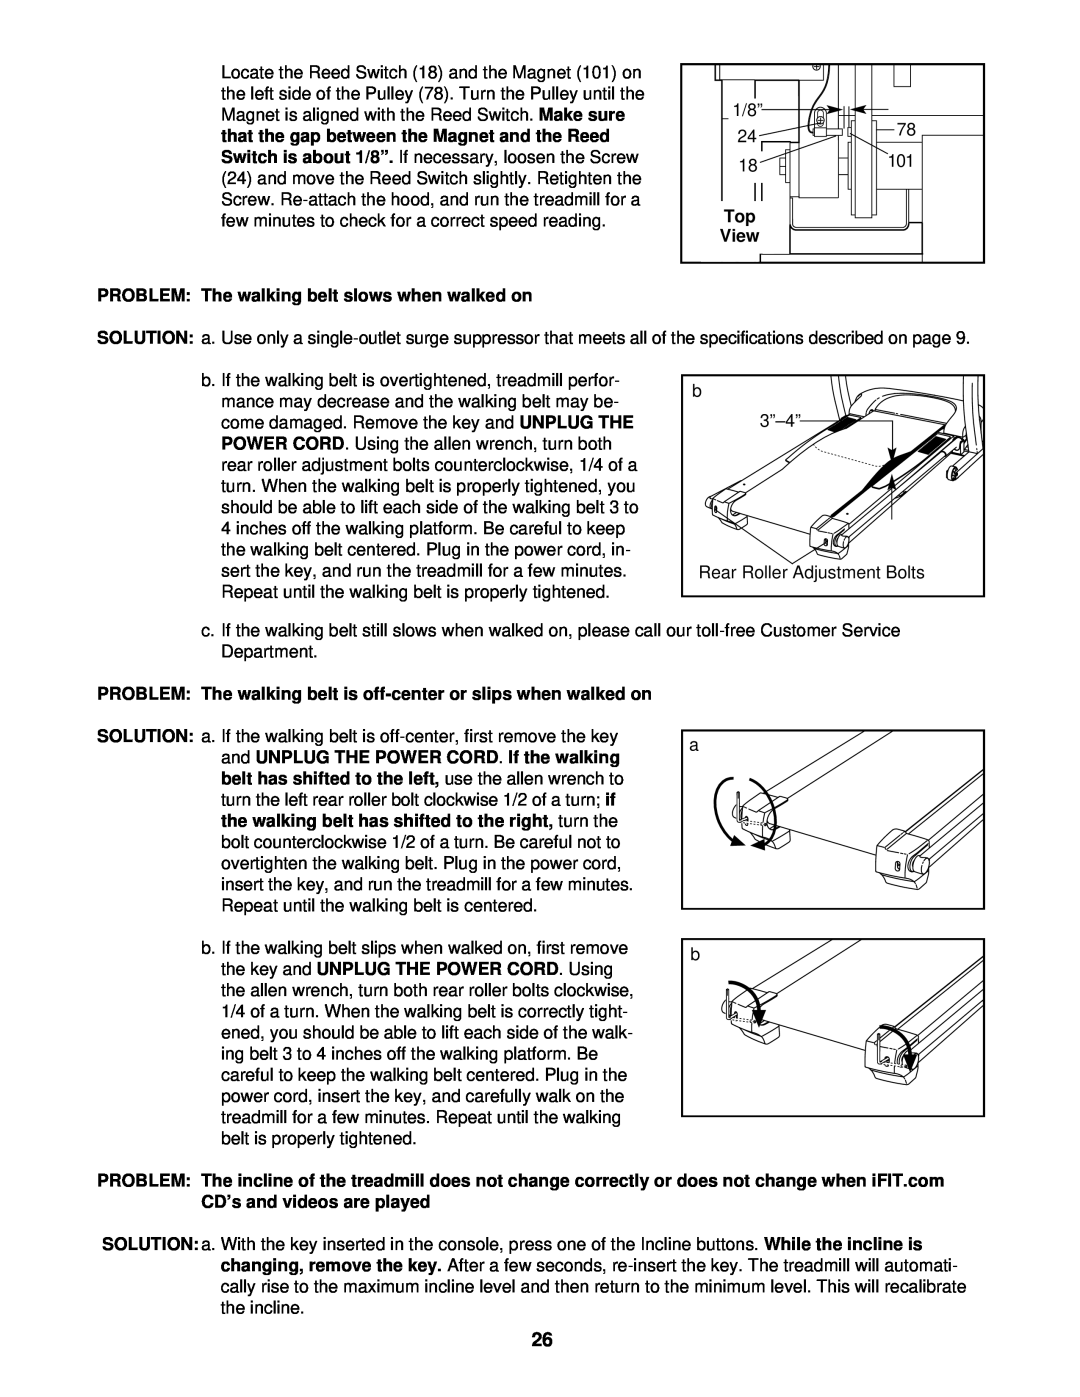 ProForm PFTL59121 user manual PROBLEM The walking belt slows when walked on, View 